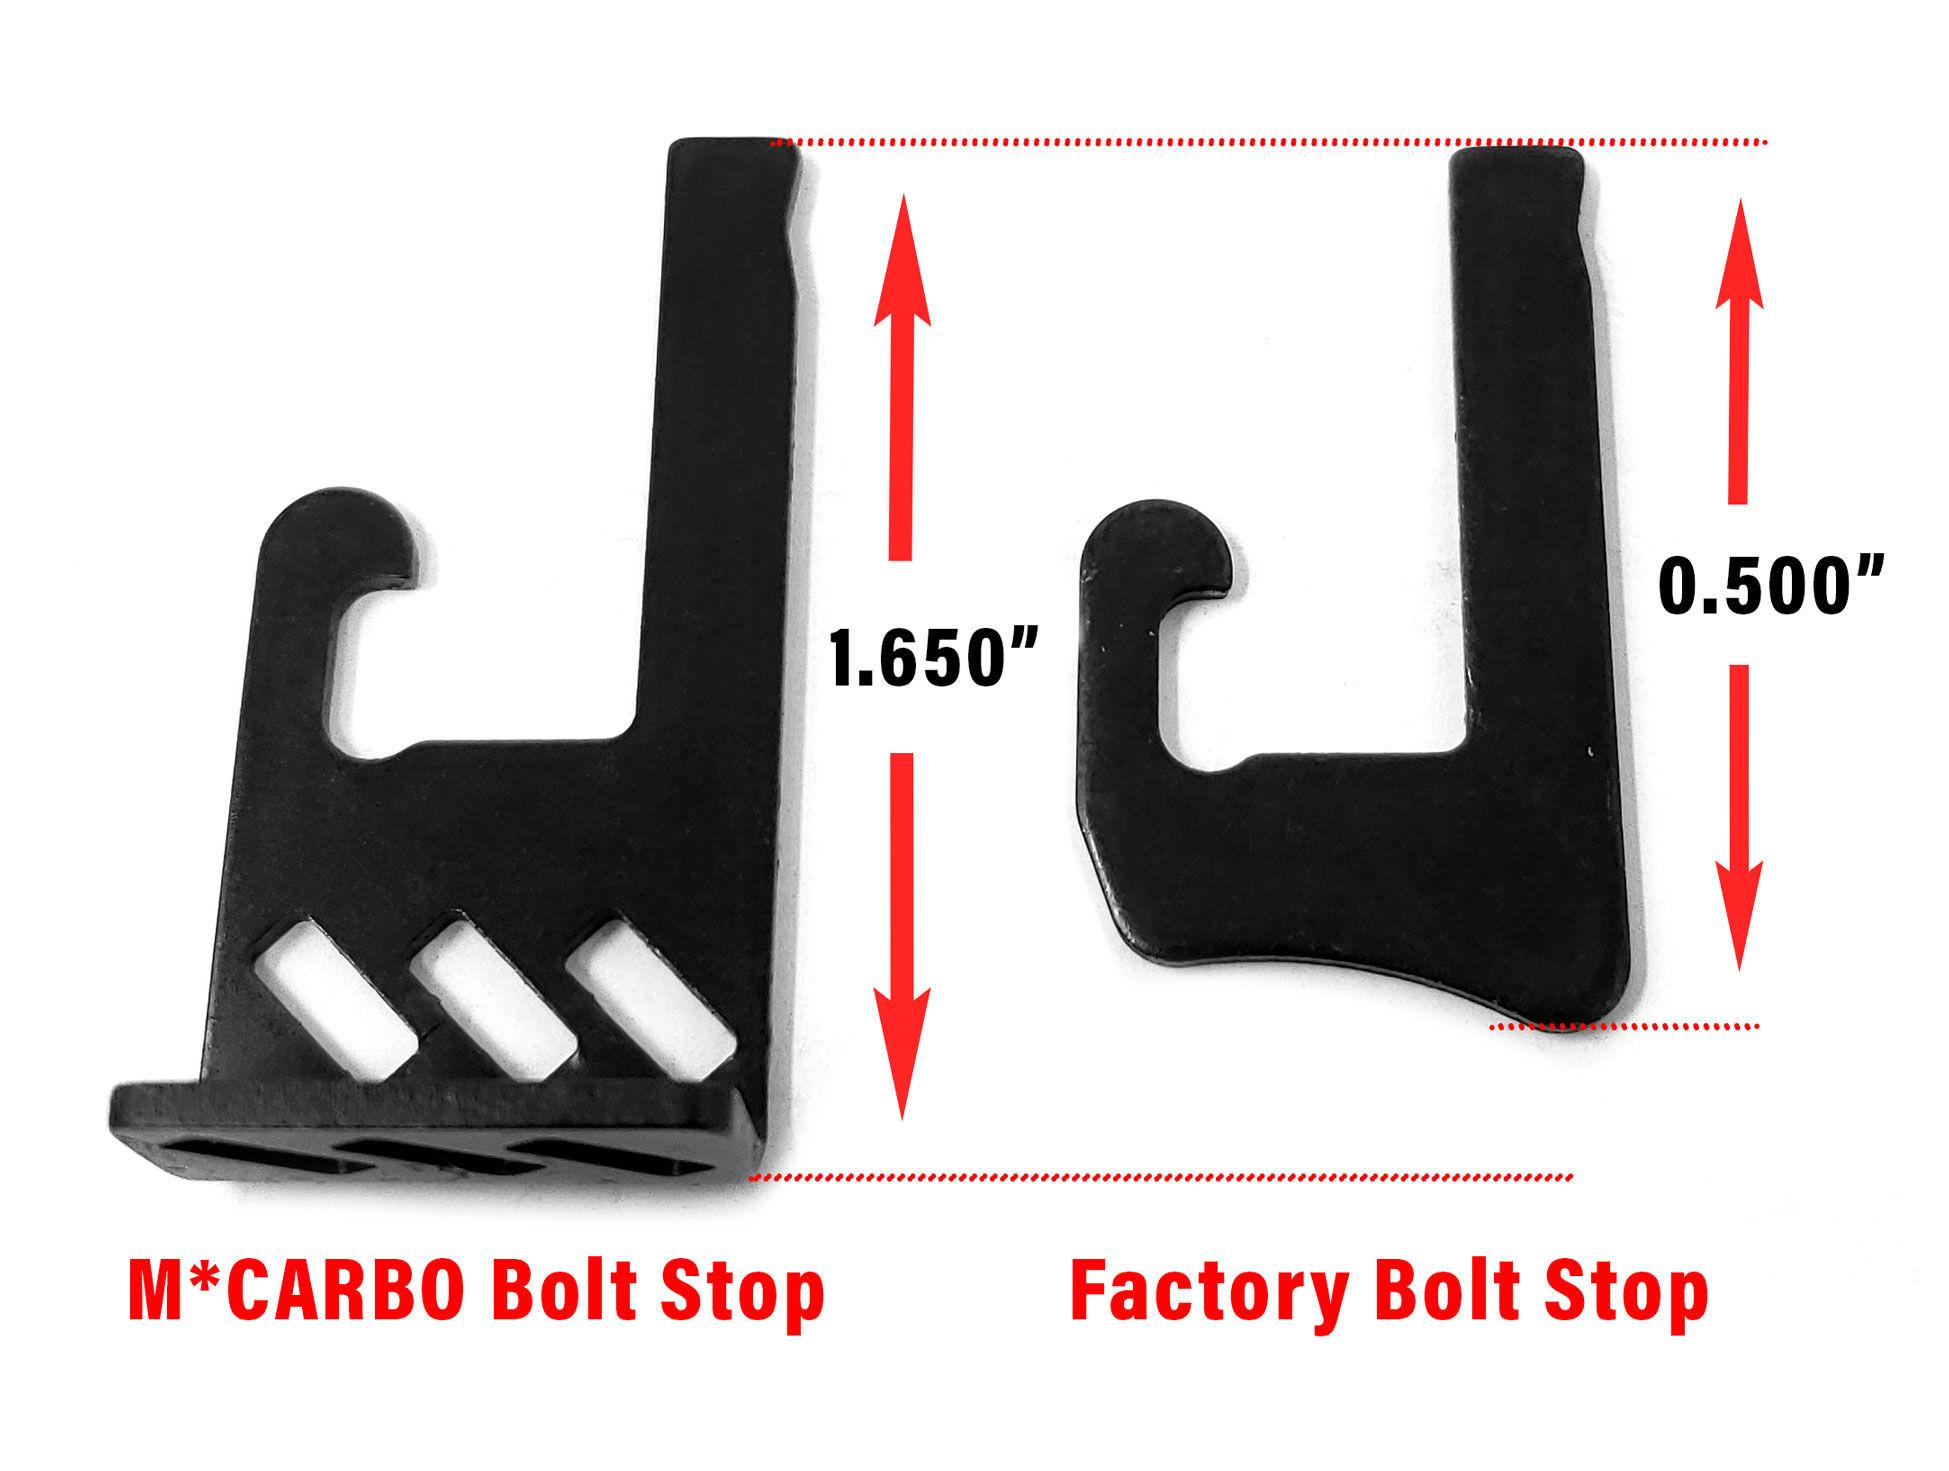 Stock Ruger PC Carbine Bolt Stop Height Comparison Graphic